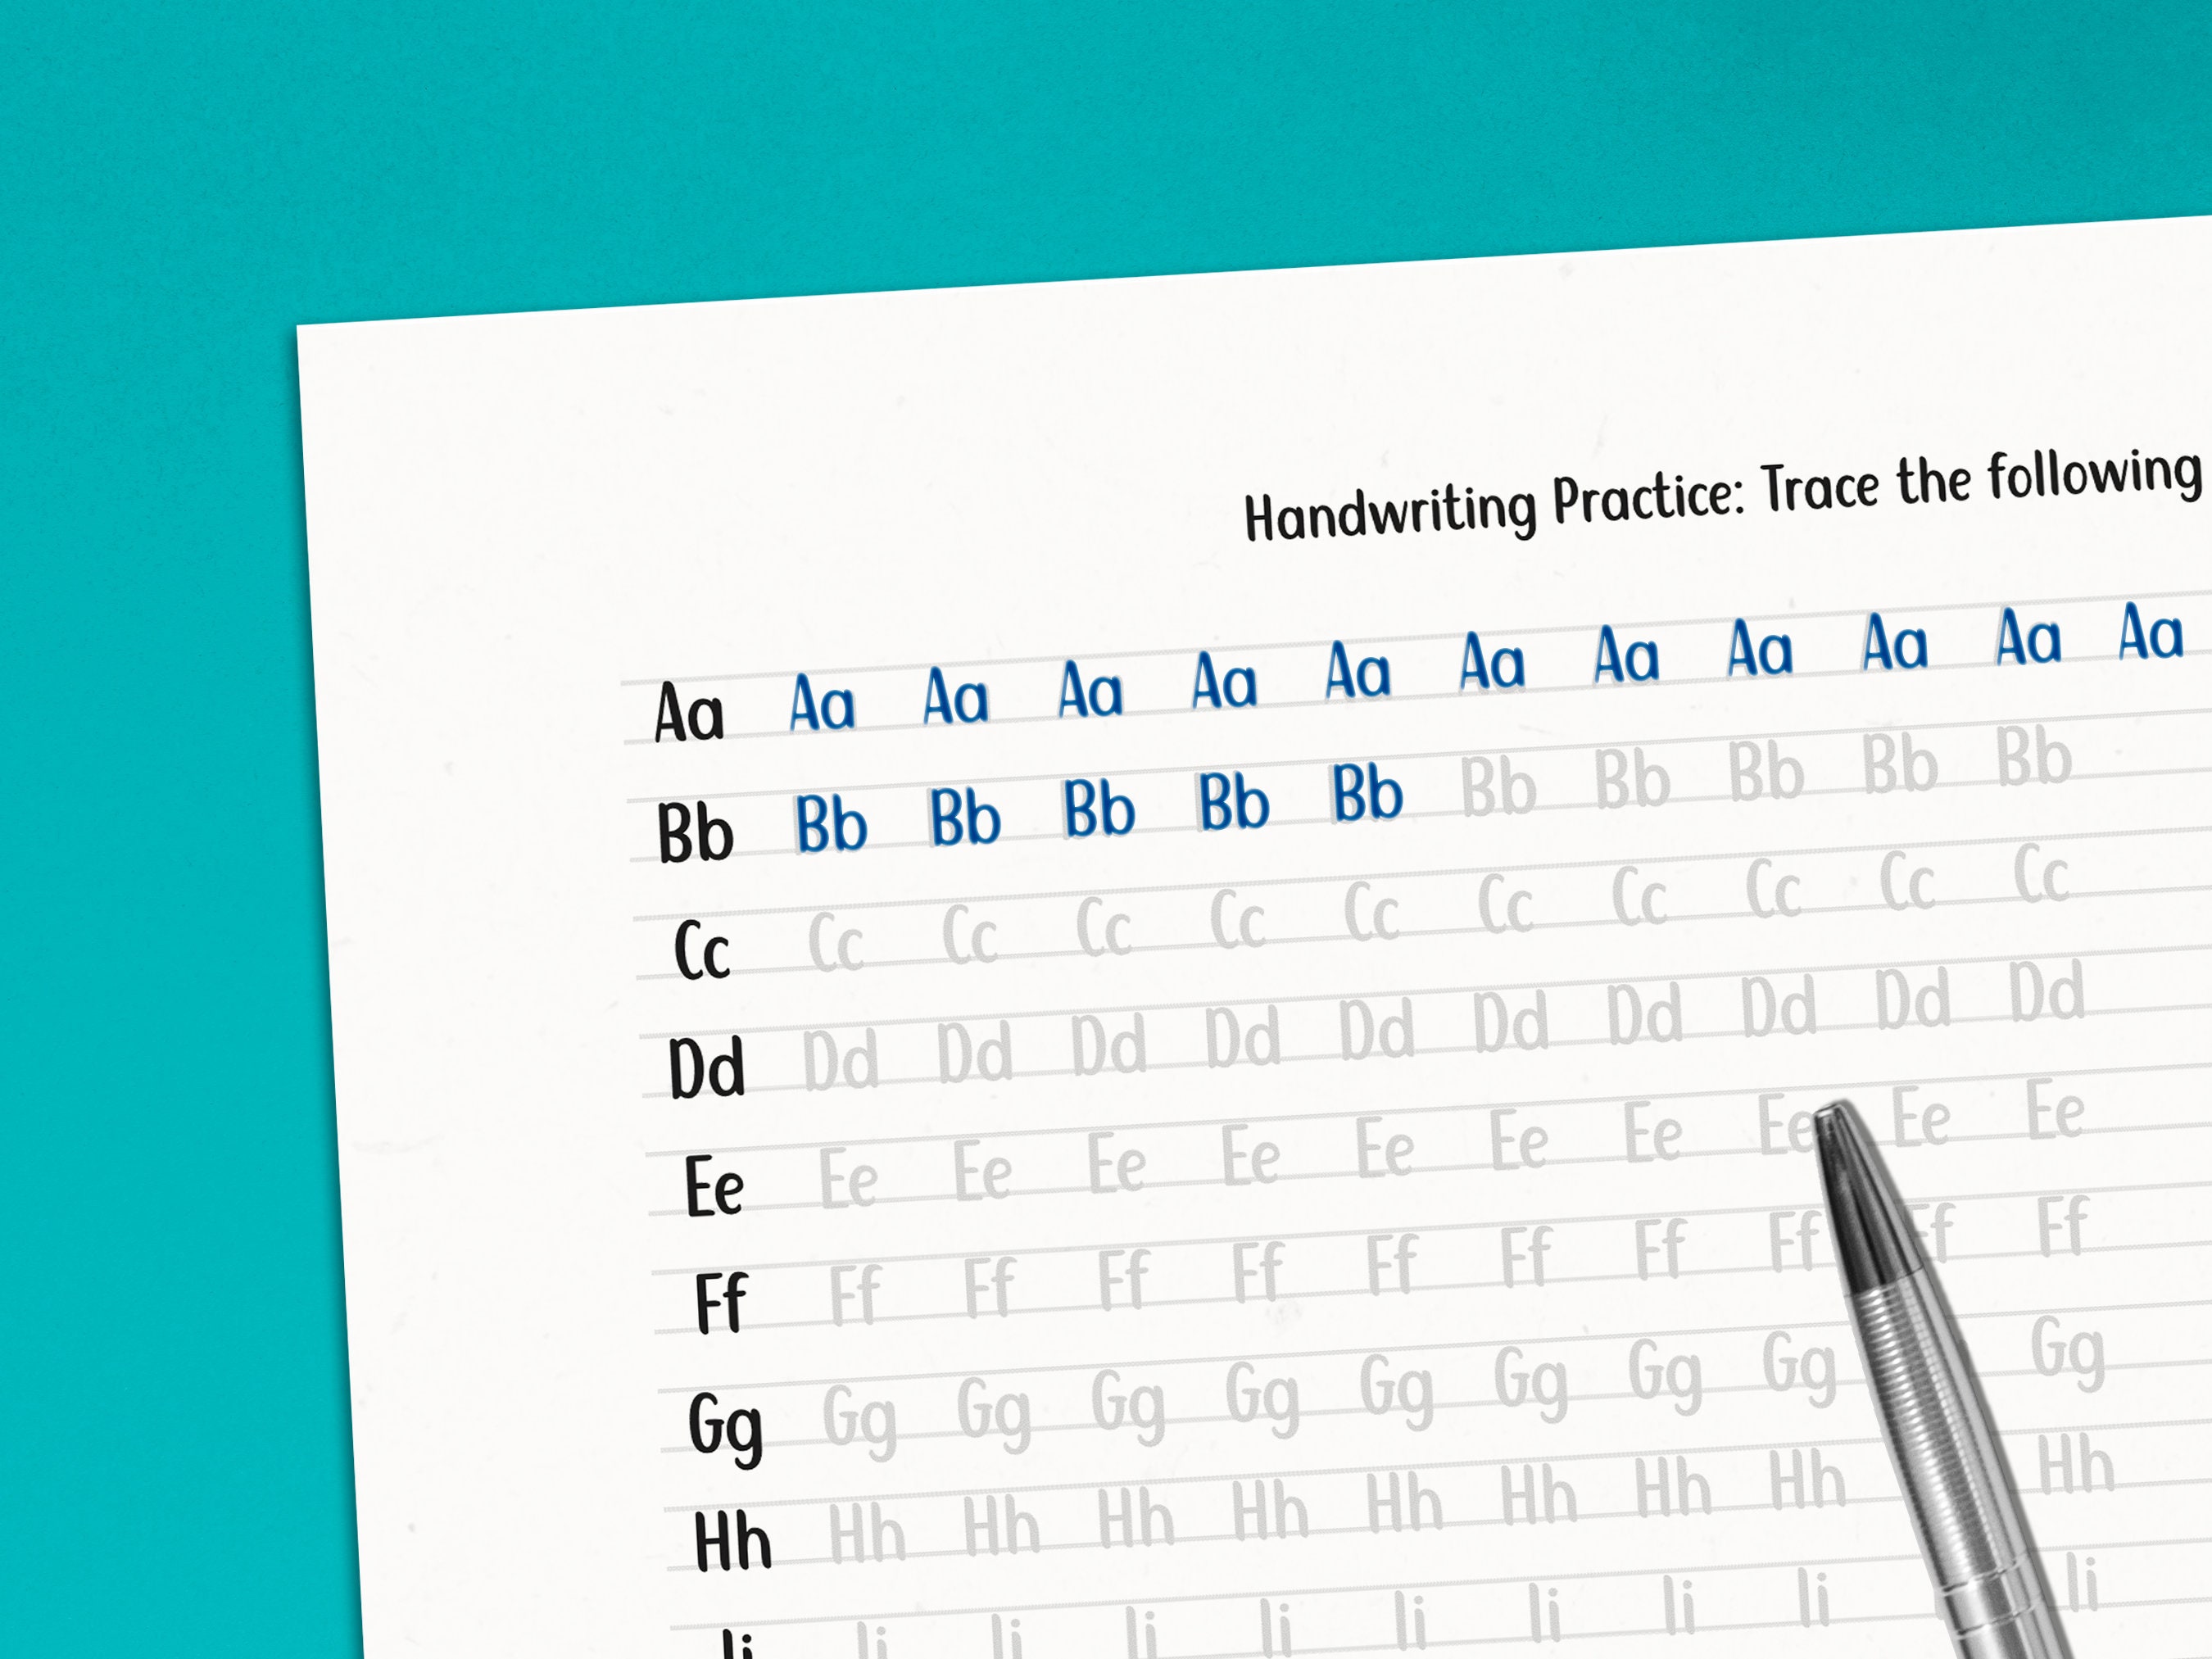 Printable Neat Handwriting Worksheets, 10 Pages, Middle School